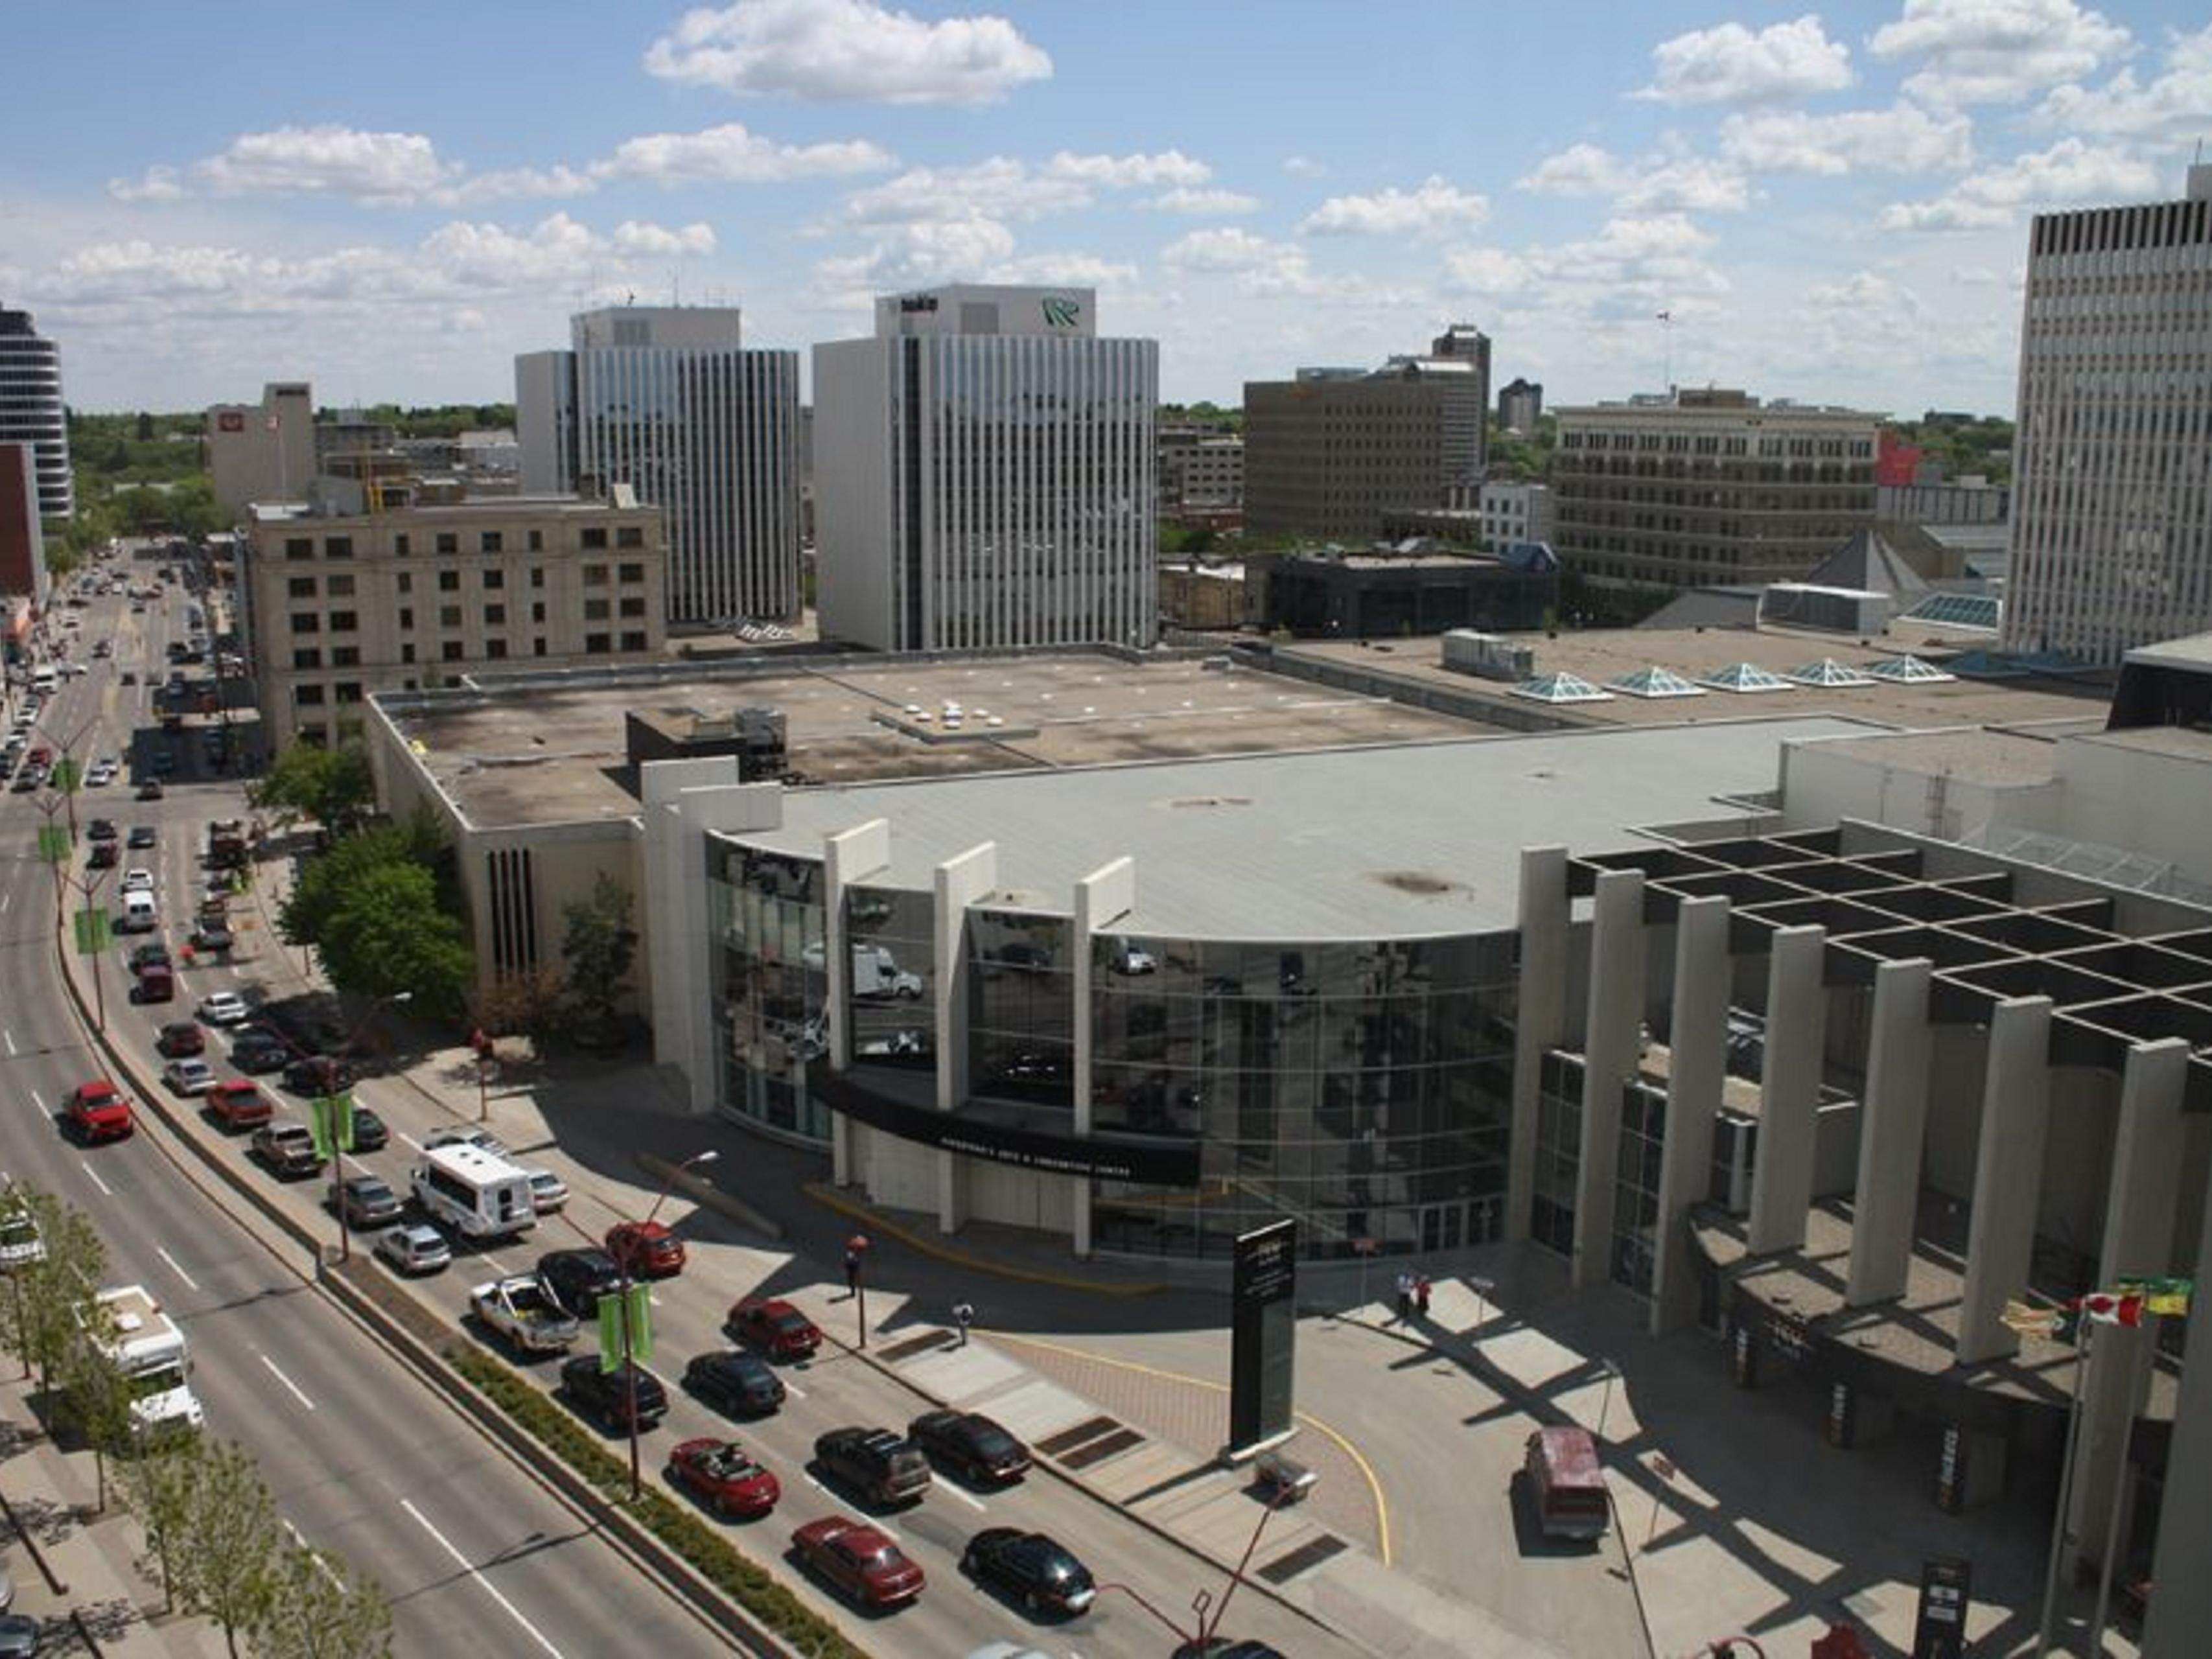 TCU Place Convention Centre and Midtown Plaza Shopping Mall